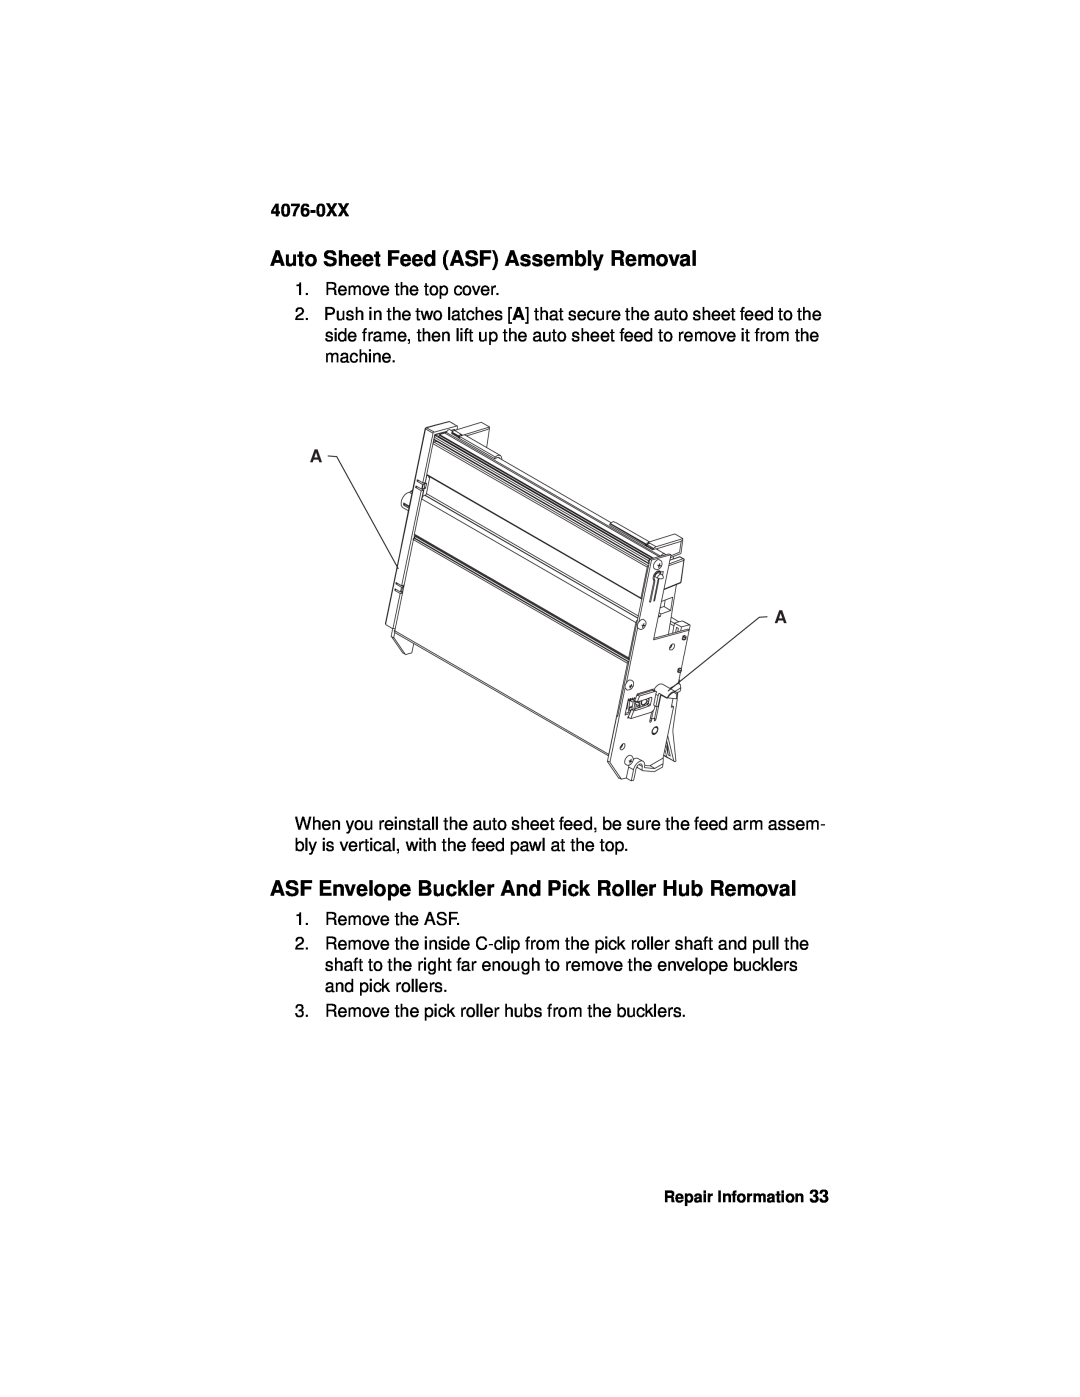 Lexmark 4076-0XX manual Auto Sheet Feed ASF Assembly Removal, ASF Envelope Buckler And Pick Roller Hub Removal 